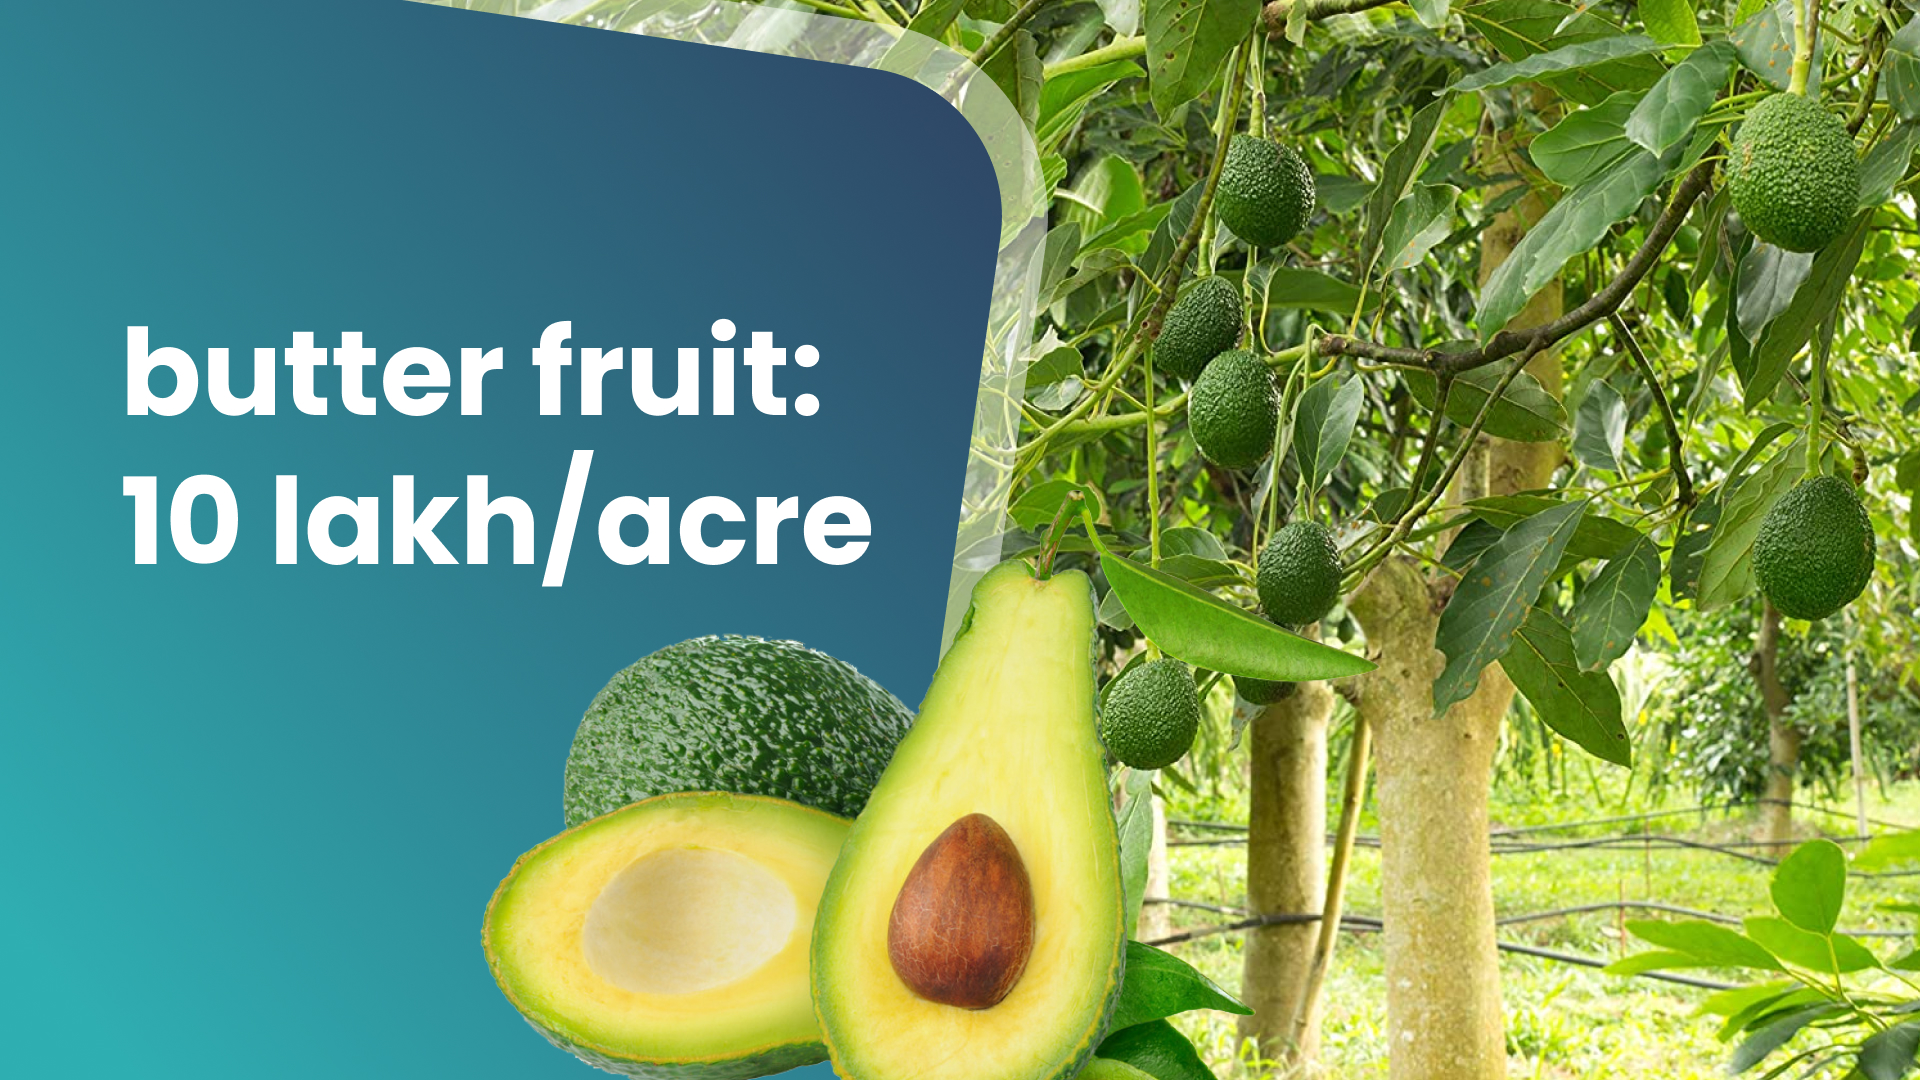 Course Trailer: Butter Fruit Farming Course - Earn 10 lakh/acre. Watch to know more.